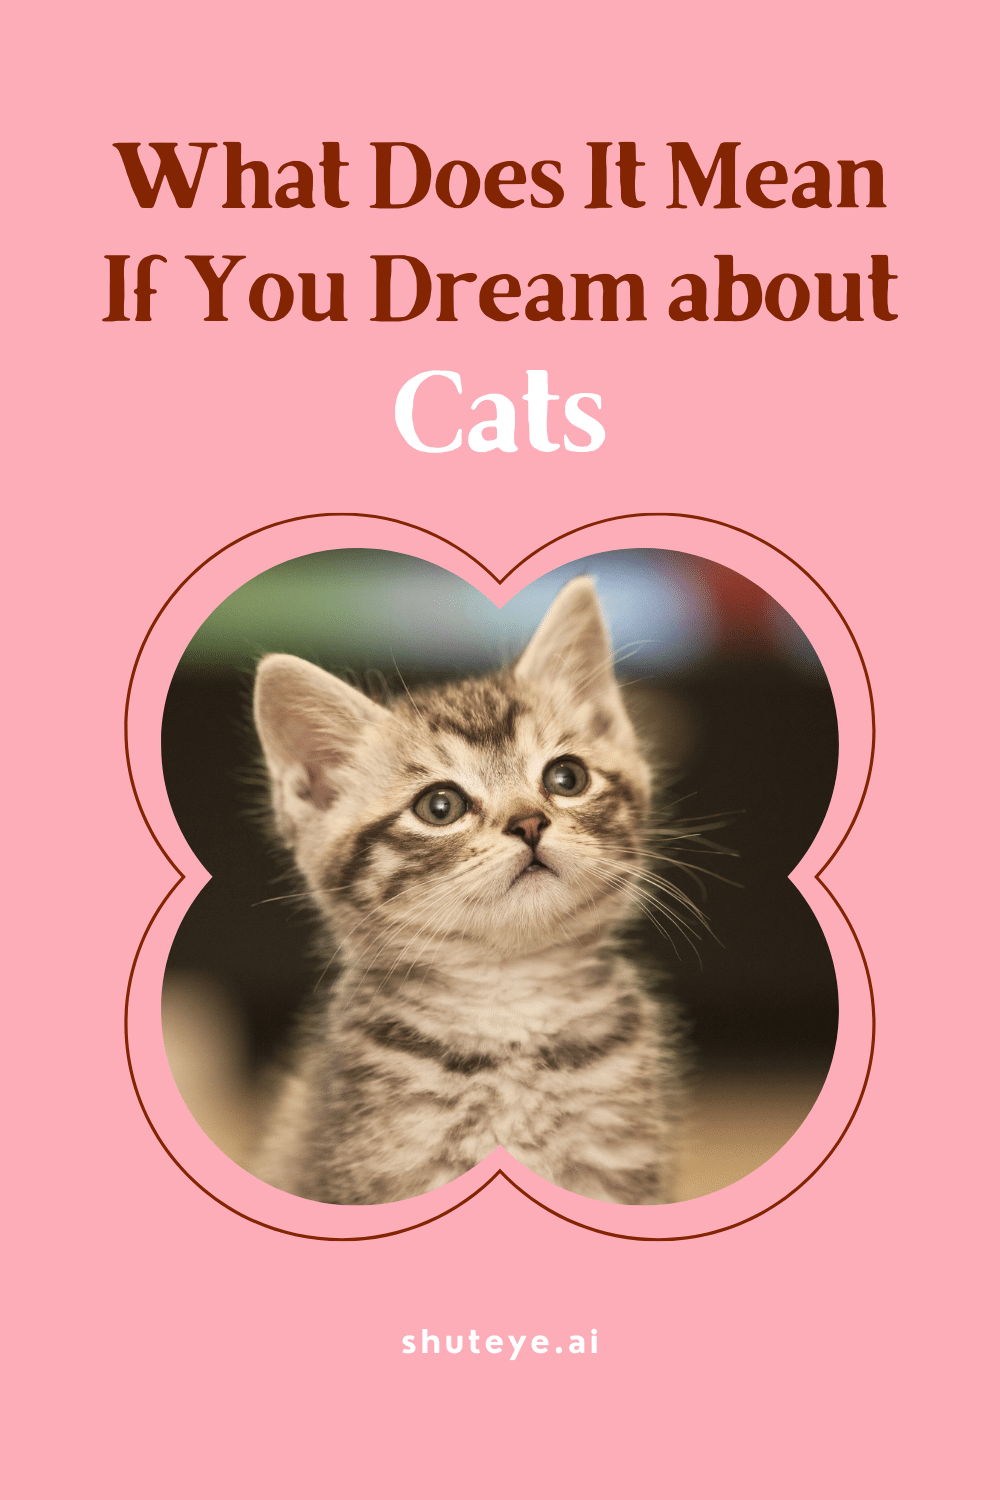 What Does It Mean If You Dream about Cats?